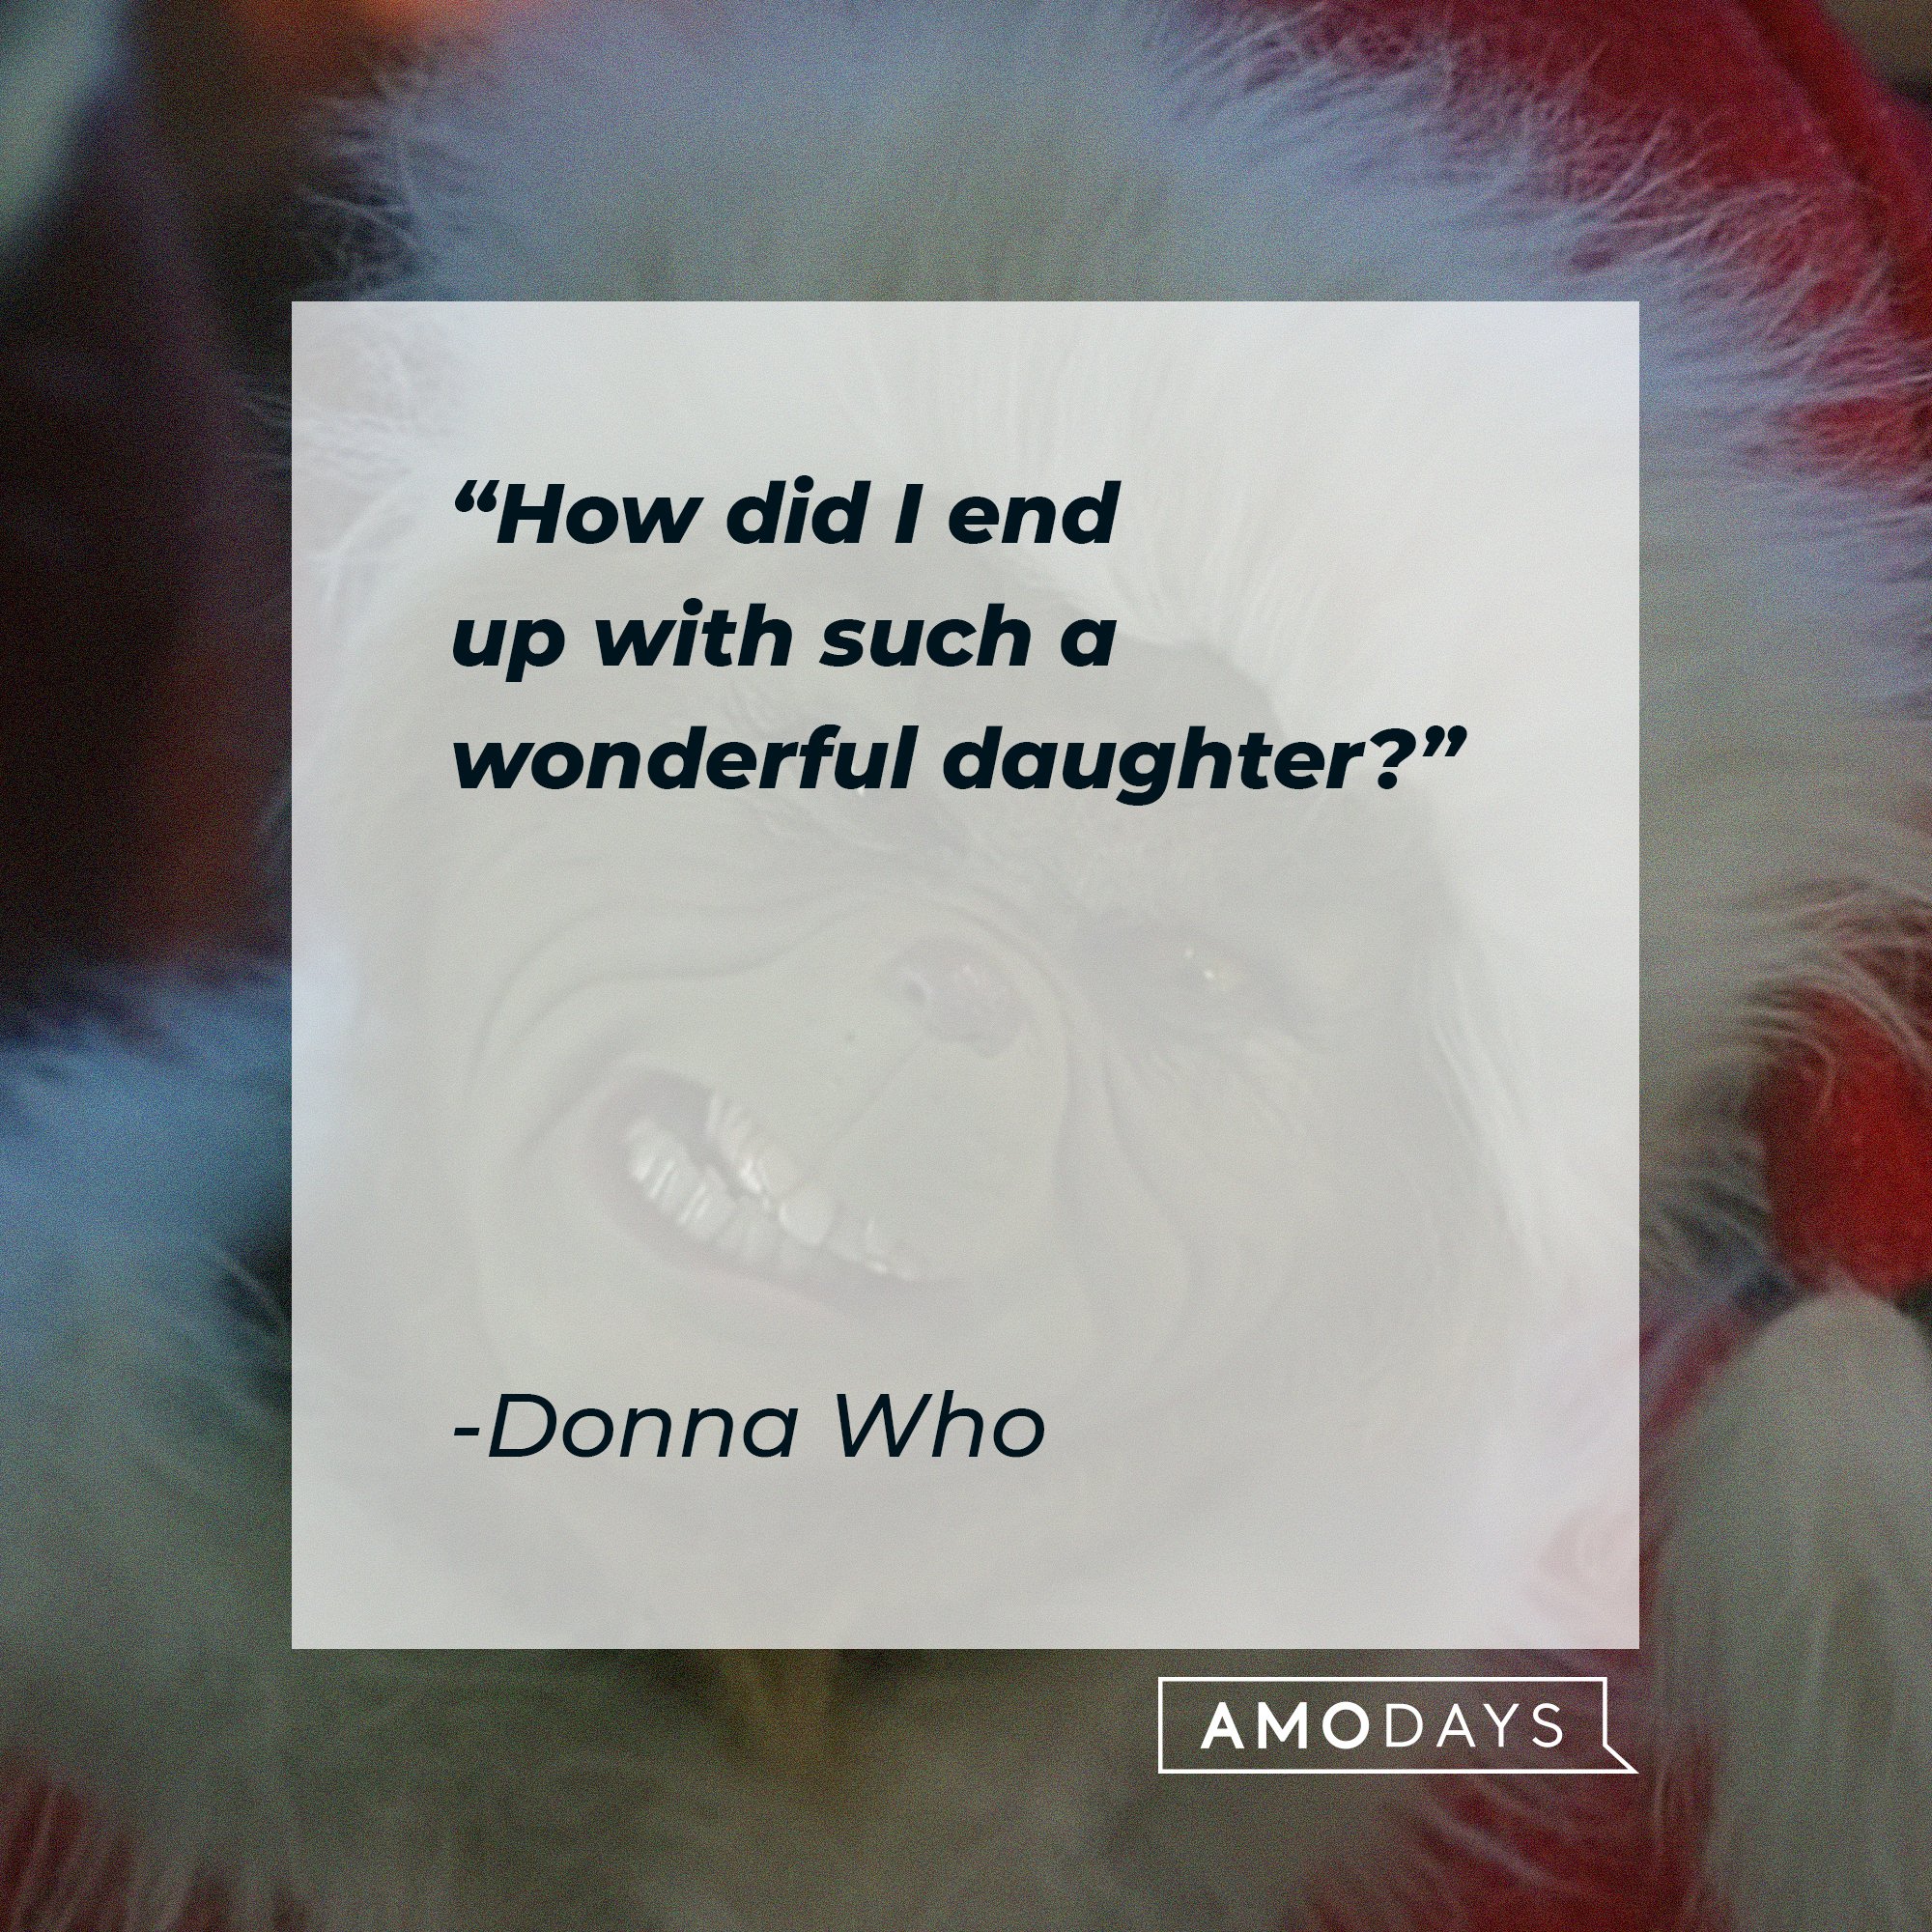 Donna Who’s quote: "How did I end up with such a wonderful daughter?" | Image: AmoDays